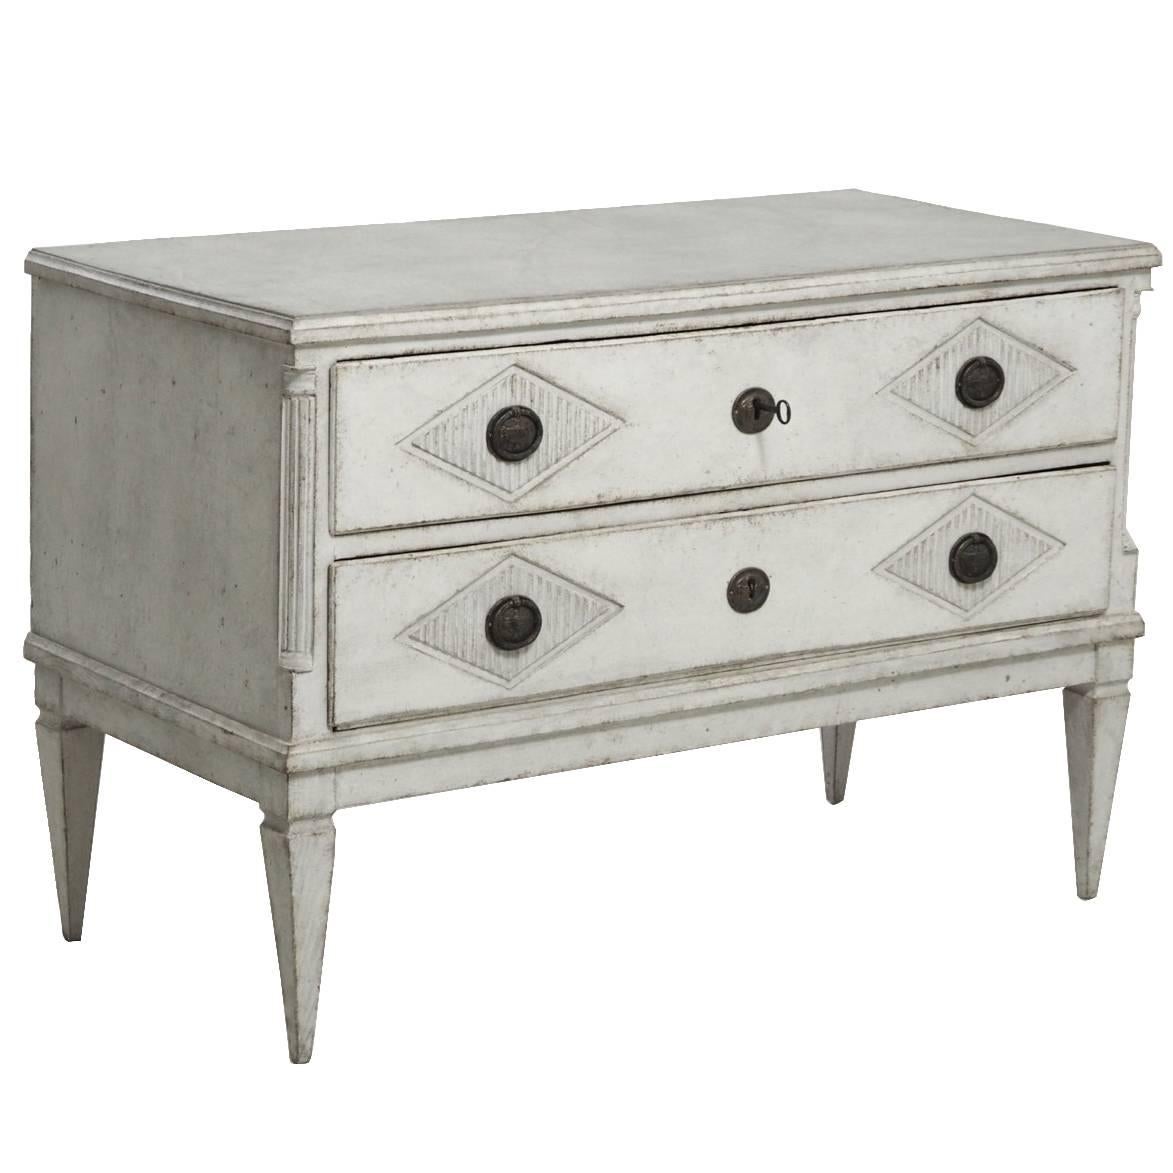 18th Century Swedish Gustavian Period Painted Chest of Drawers